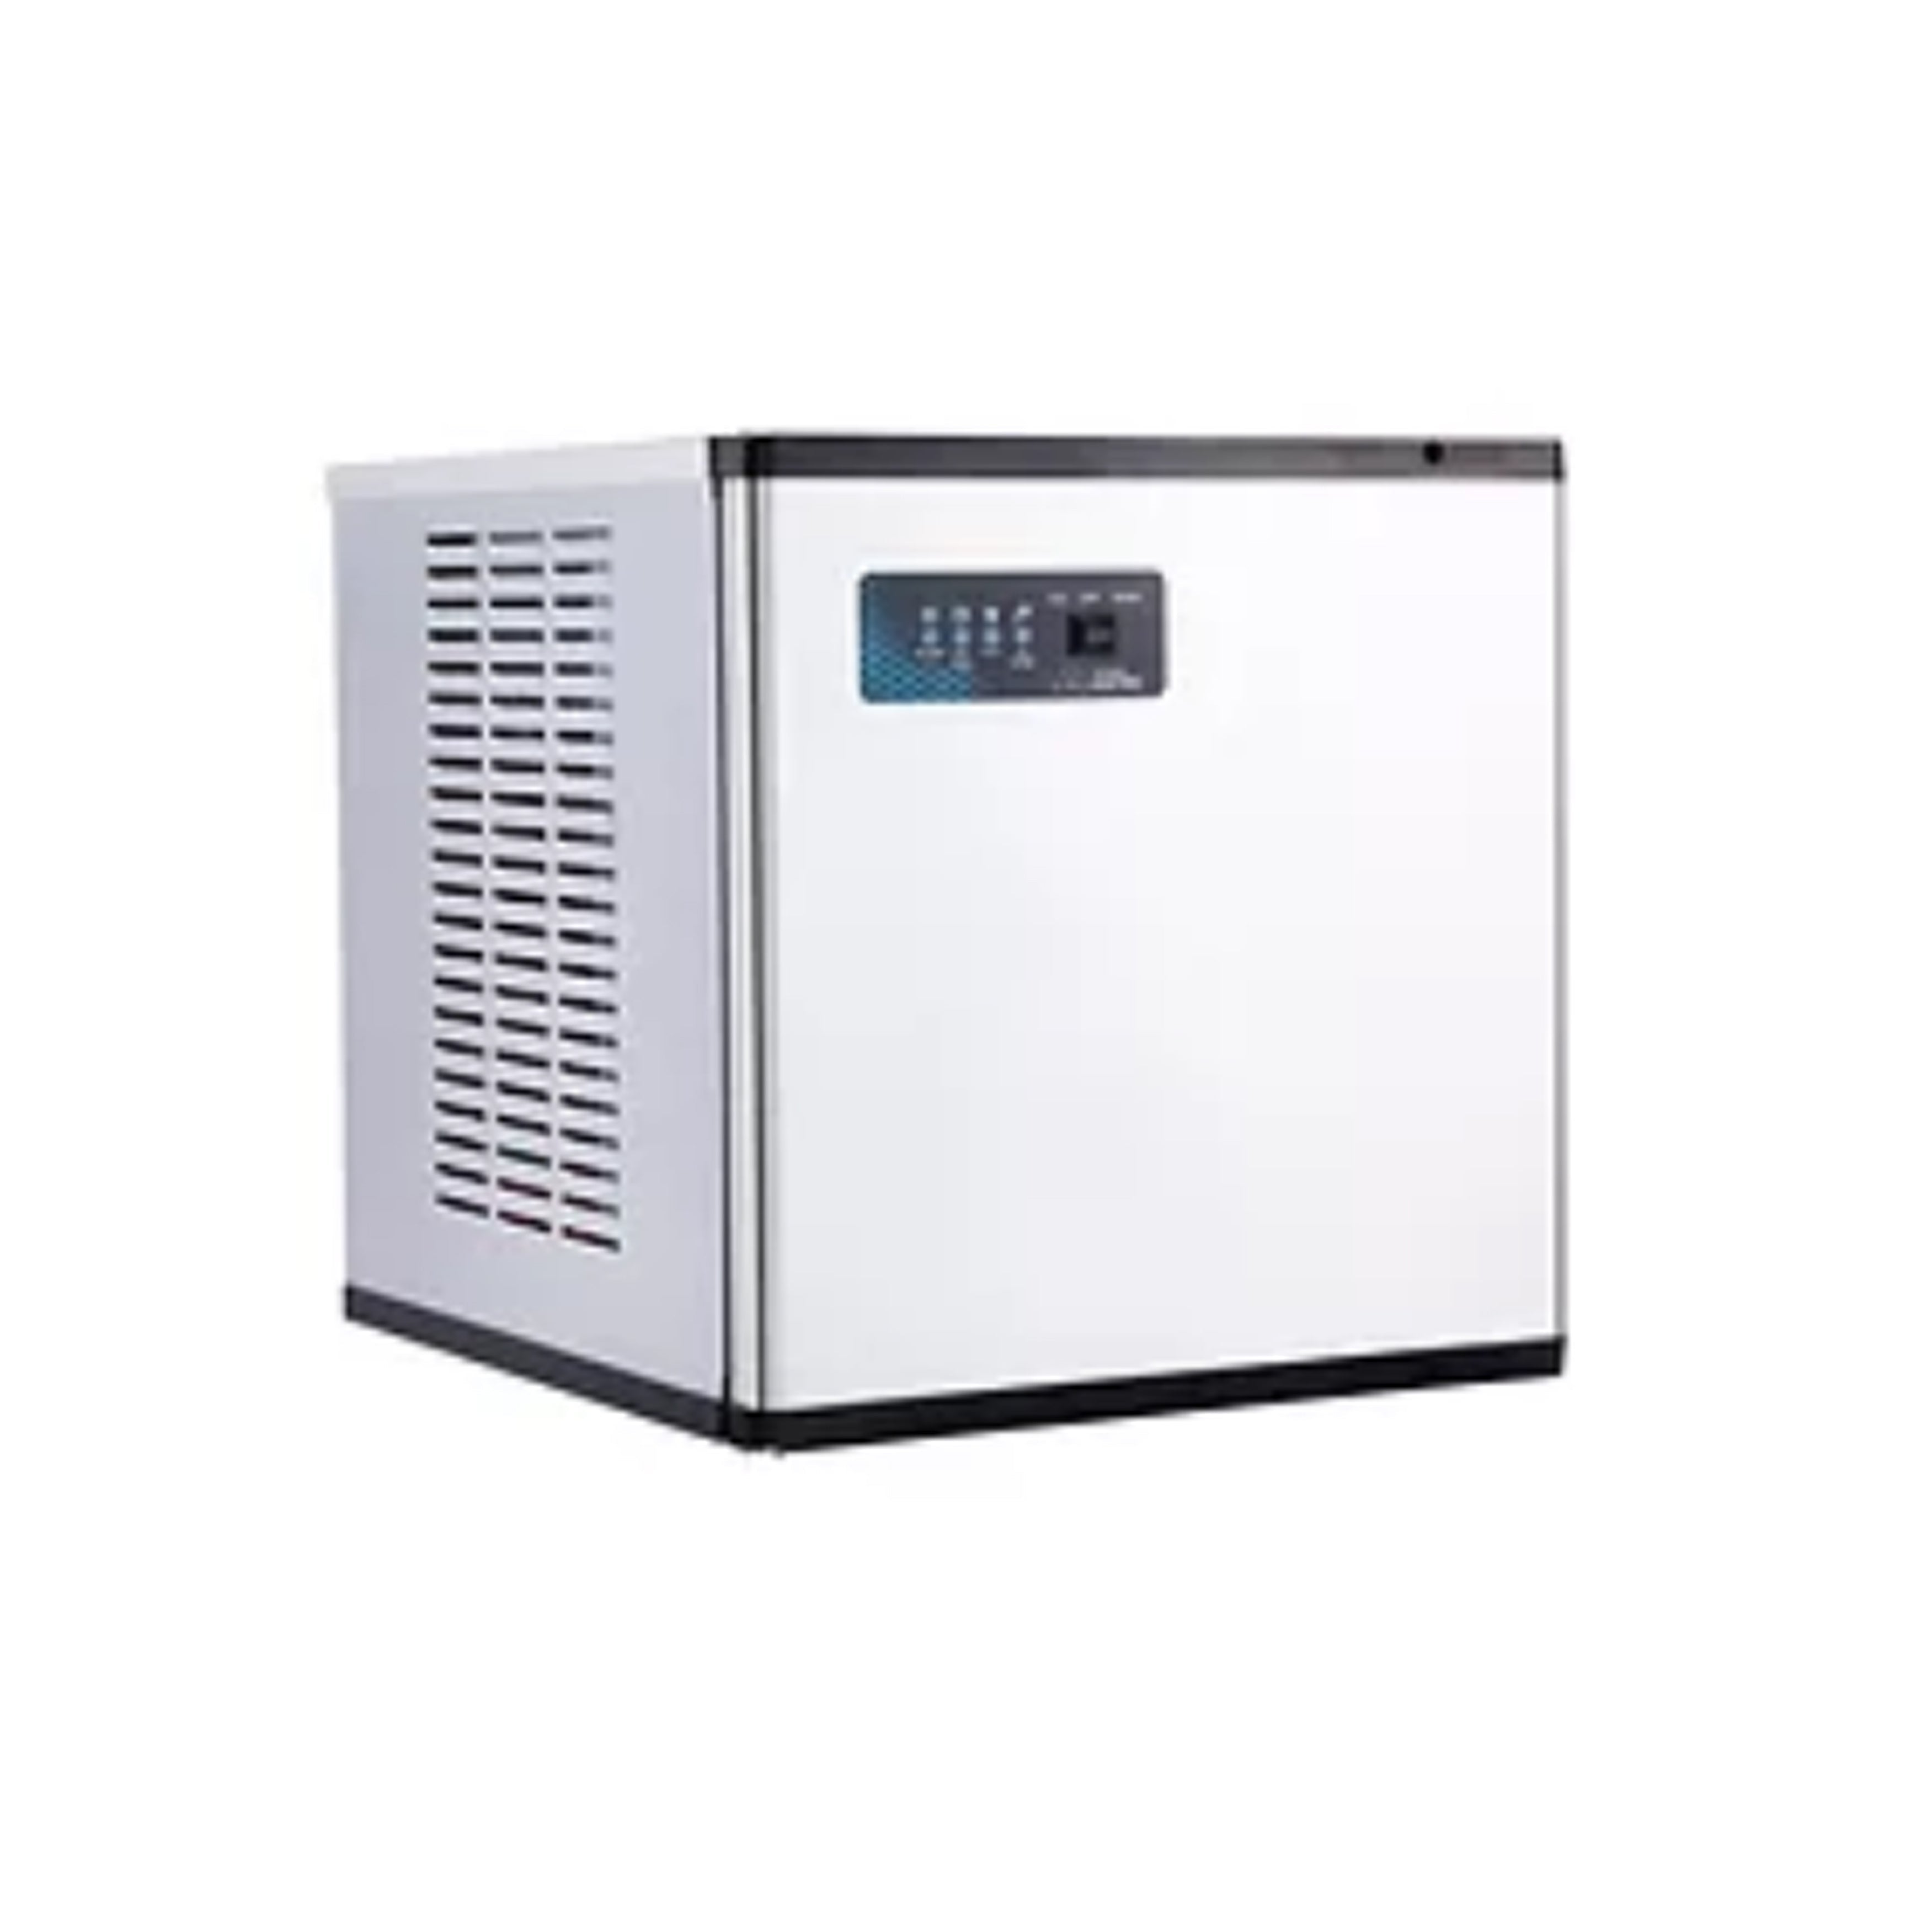 Icetro - IM-0550-AH, Commercial 551lbs Modular Air Cooled Ice Machine Half Ice Cube Maker